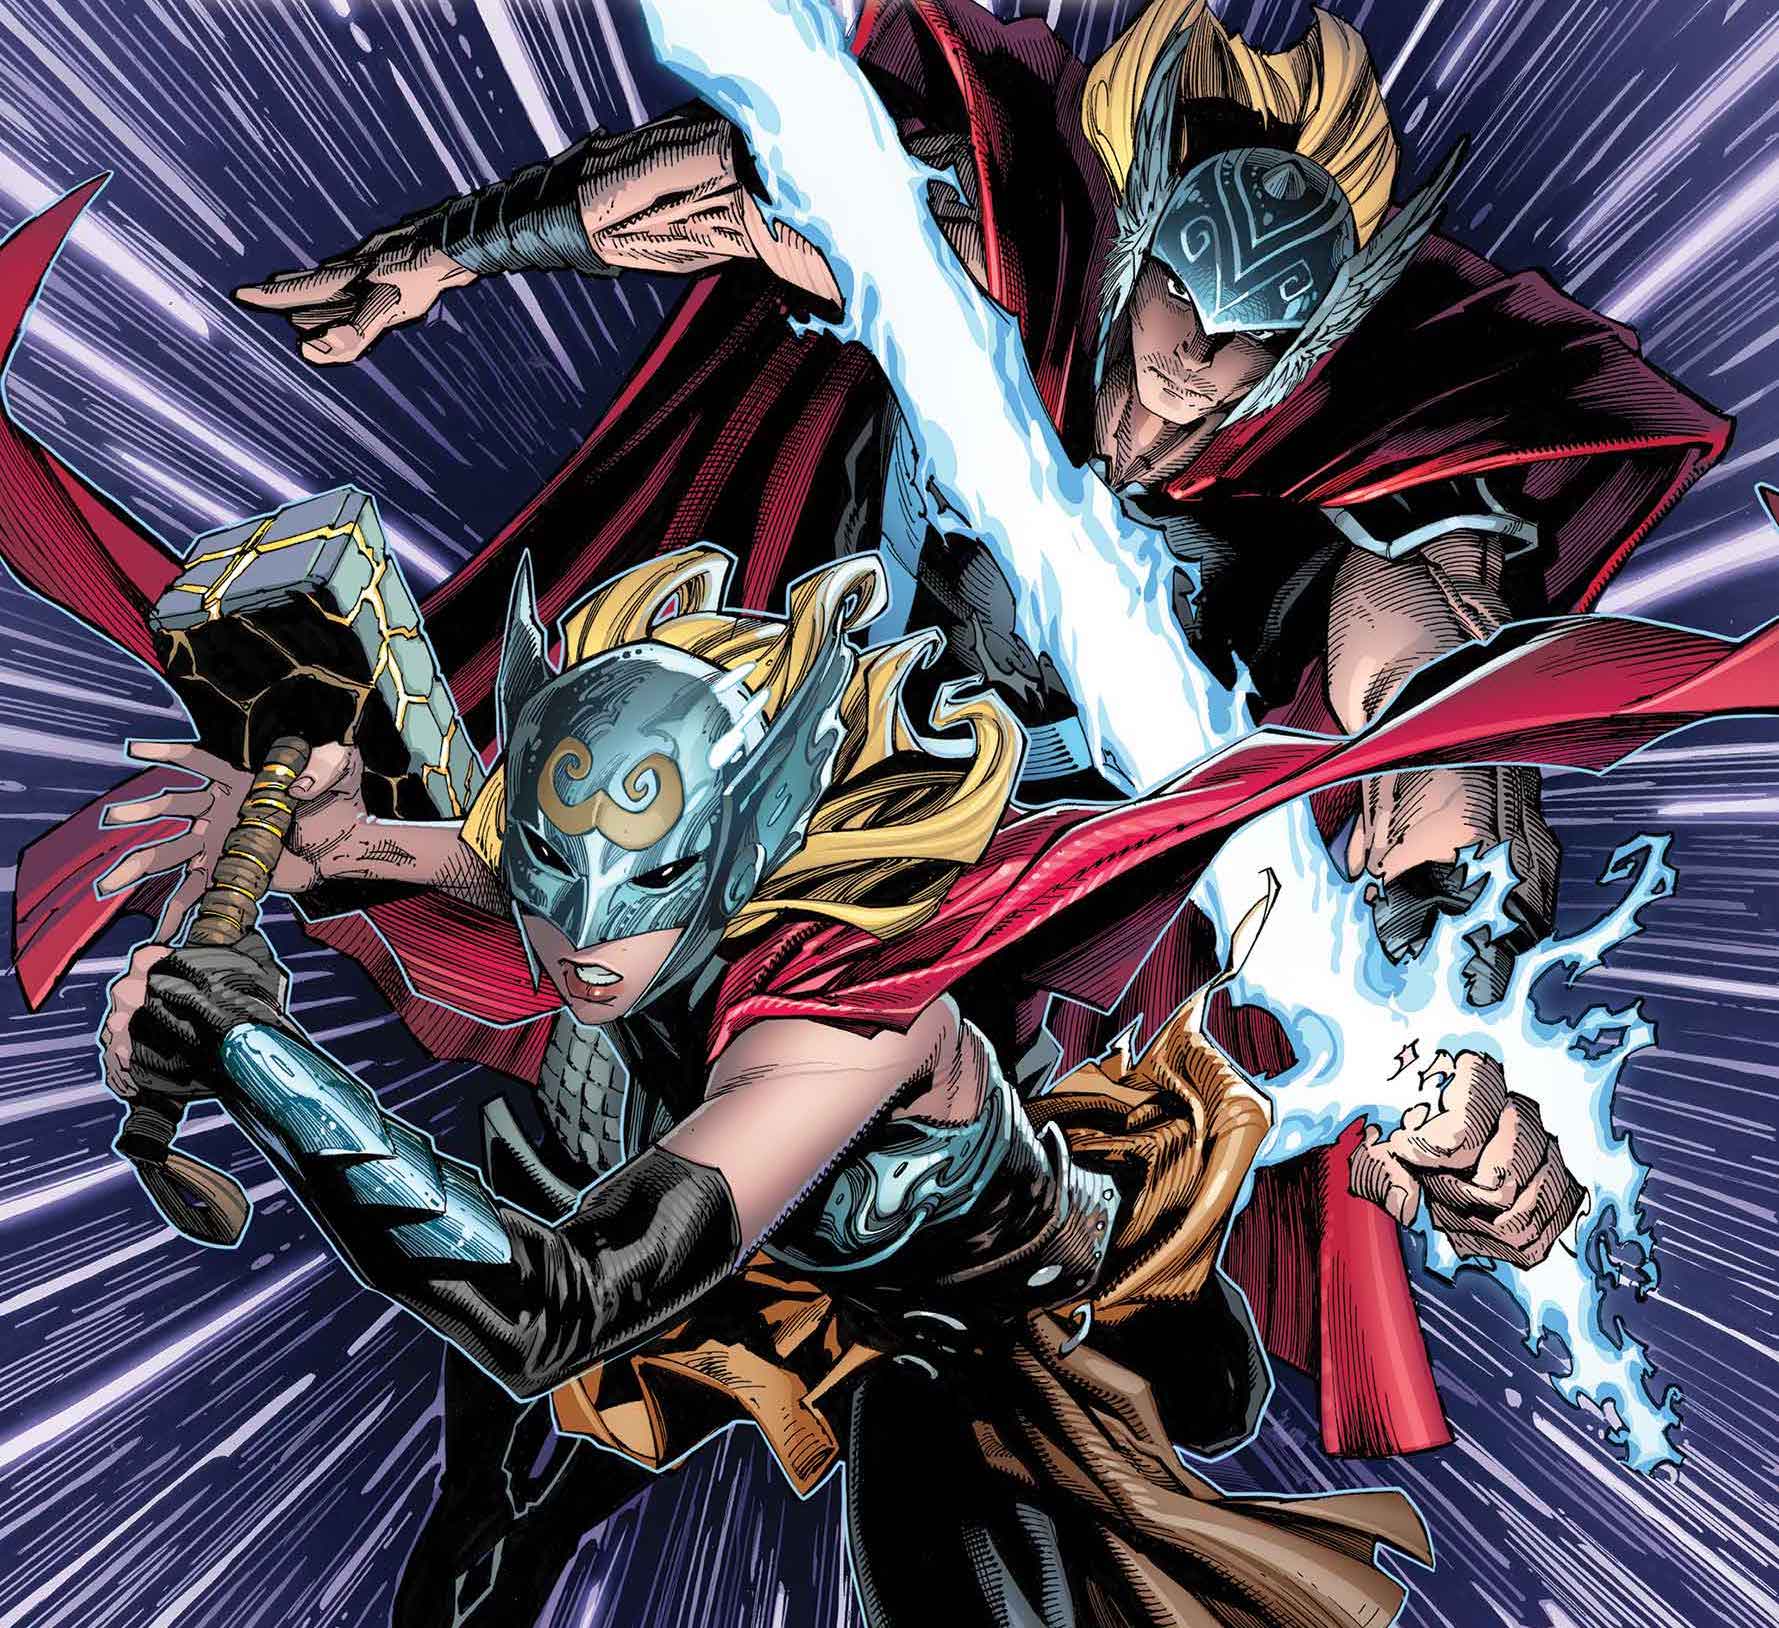 'Jane Foster & the Mighty Thor' #1 makes you love Valkyrie even more